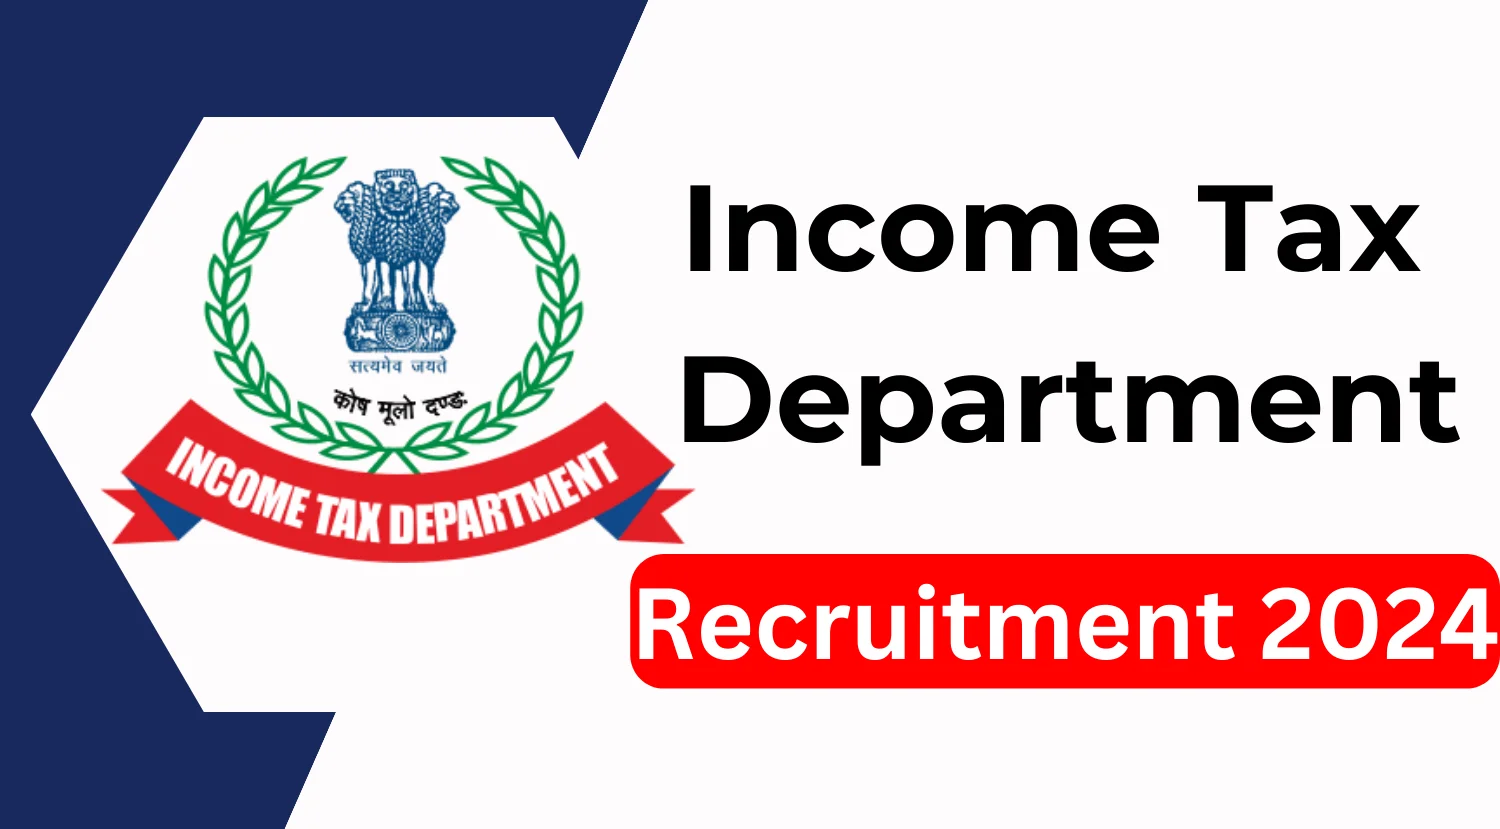 Income Tax Department Recruitment 2024 Notification